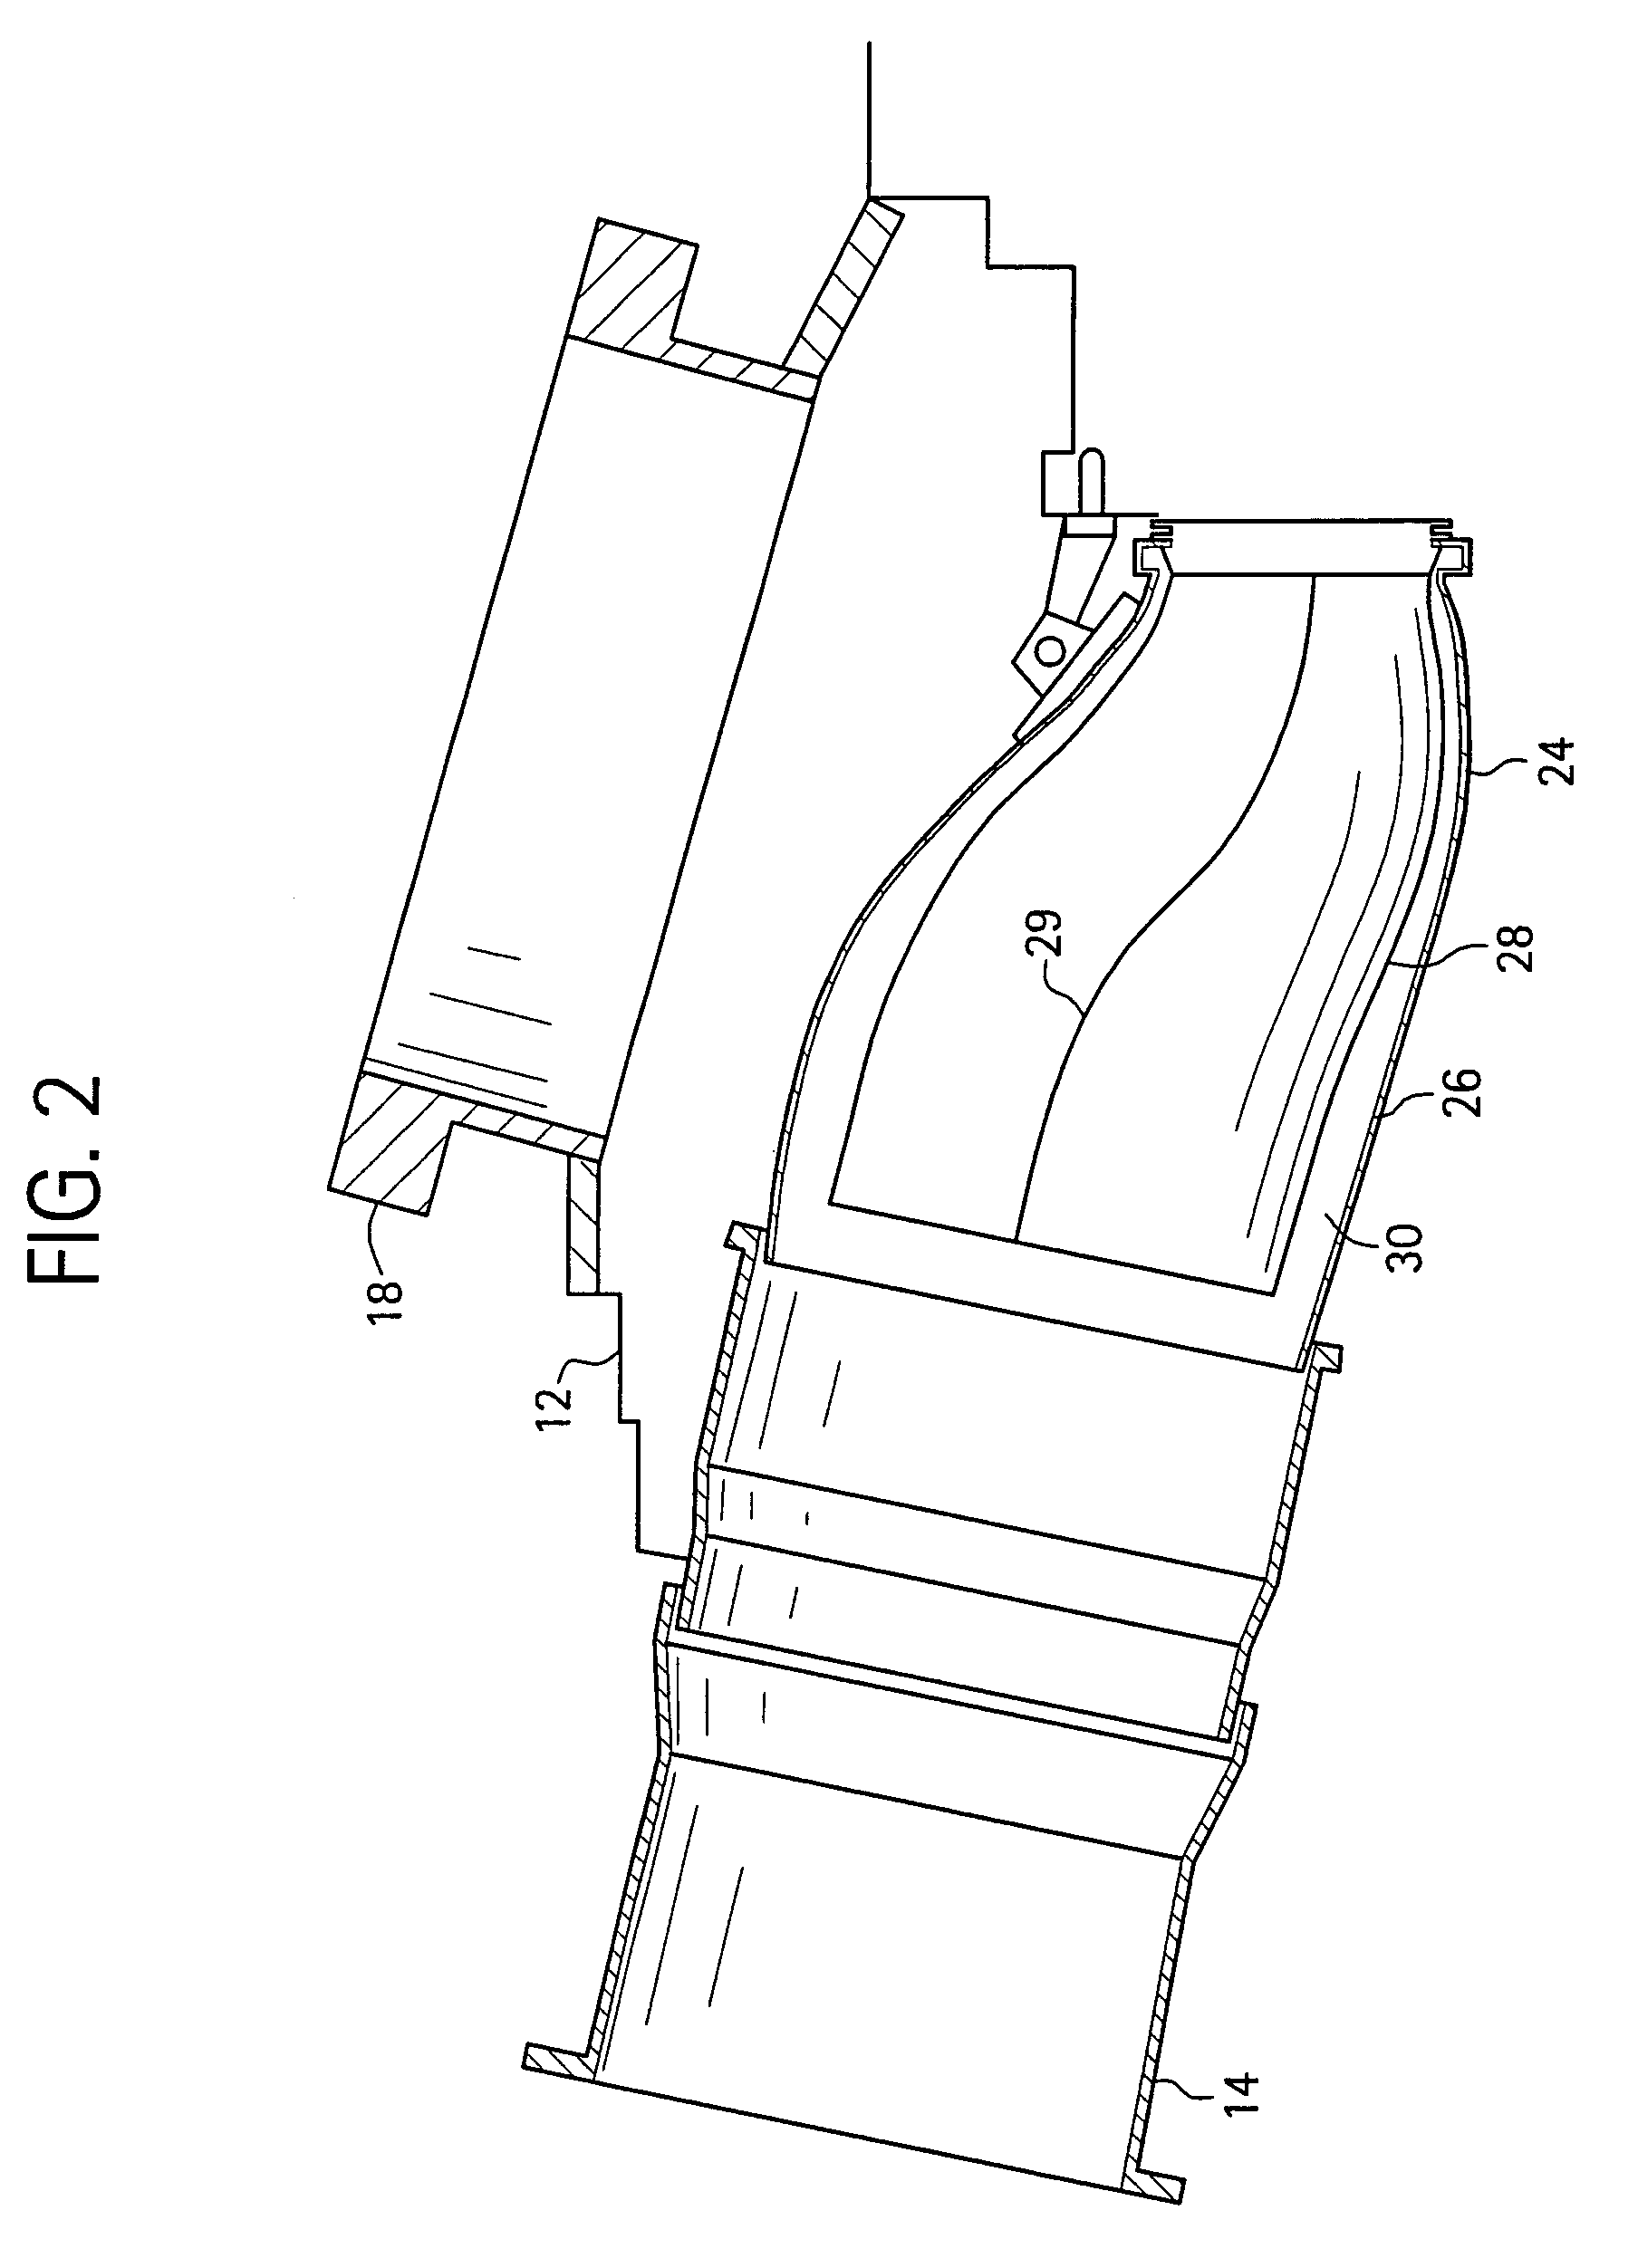 Imaging system for robotically inspecting gas turbine combustion components